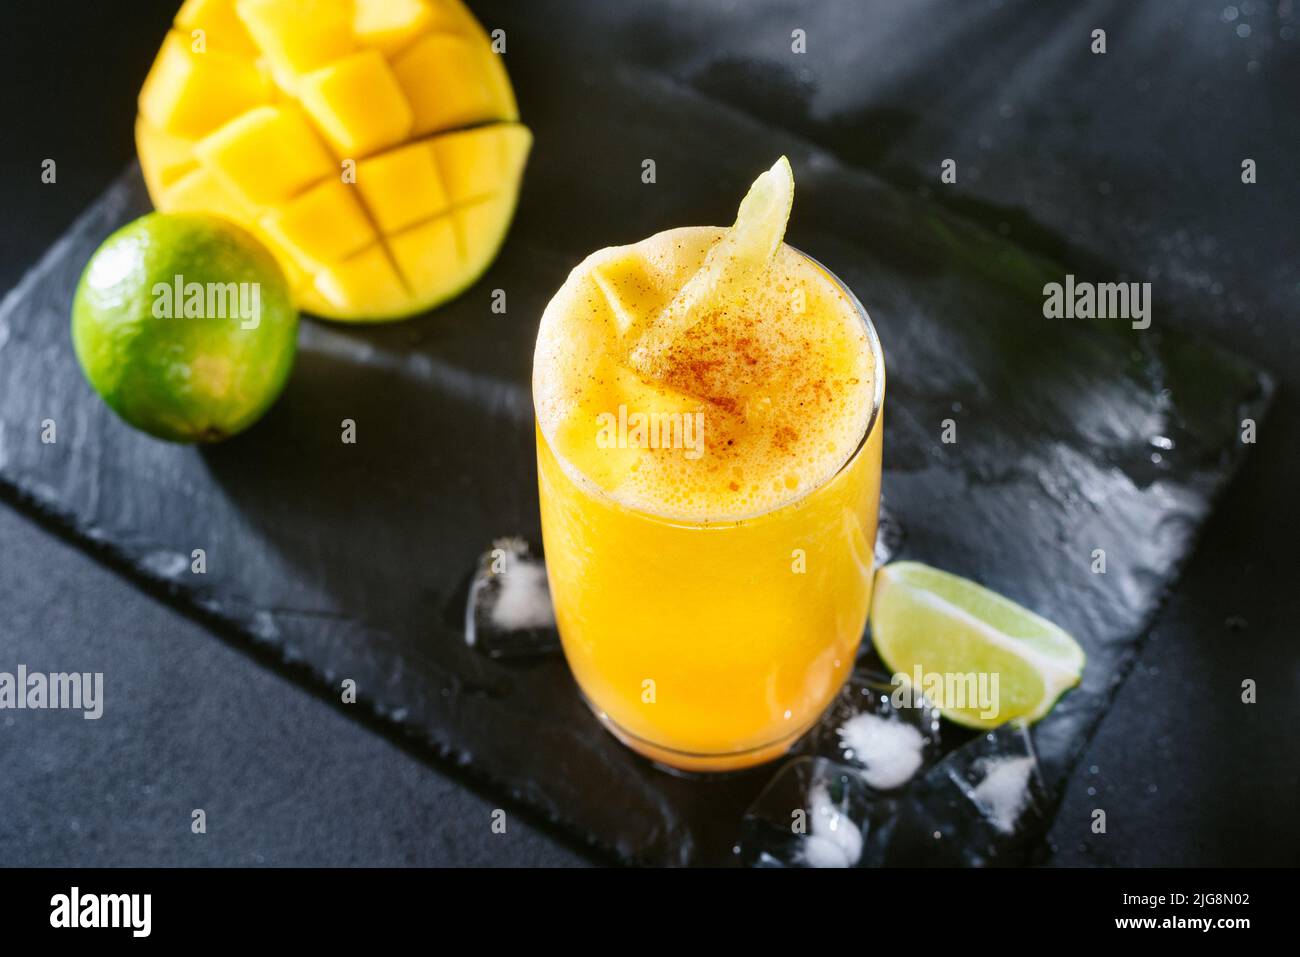 Mexican or Latin American cuisine. The classic Mexican and Southern U.S. cocktail is the Mangonada. A refreshing cocktail of mango salt and lime and Stock Photo